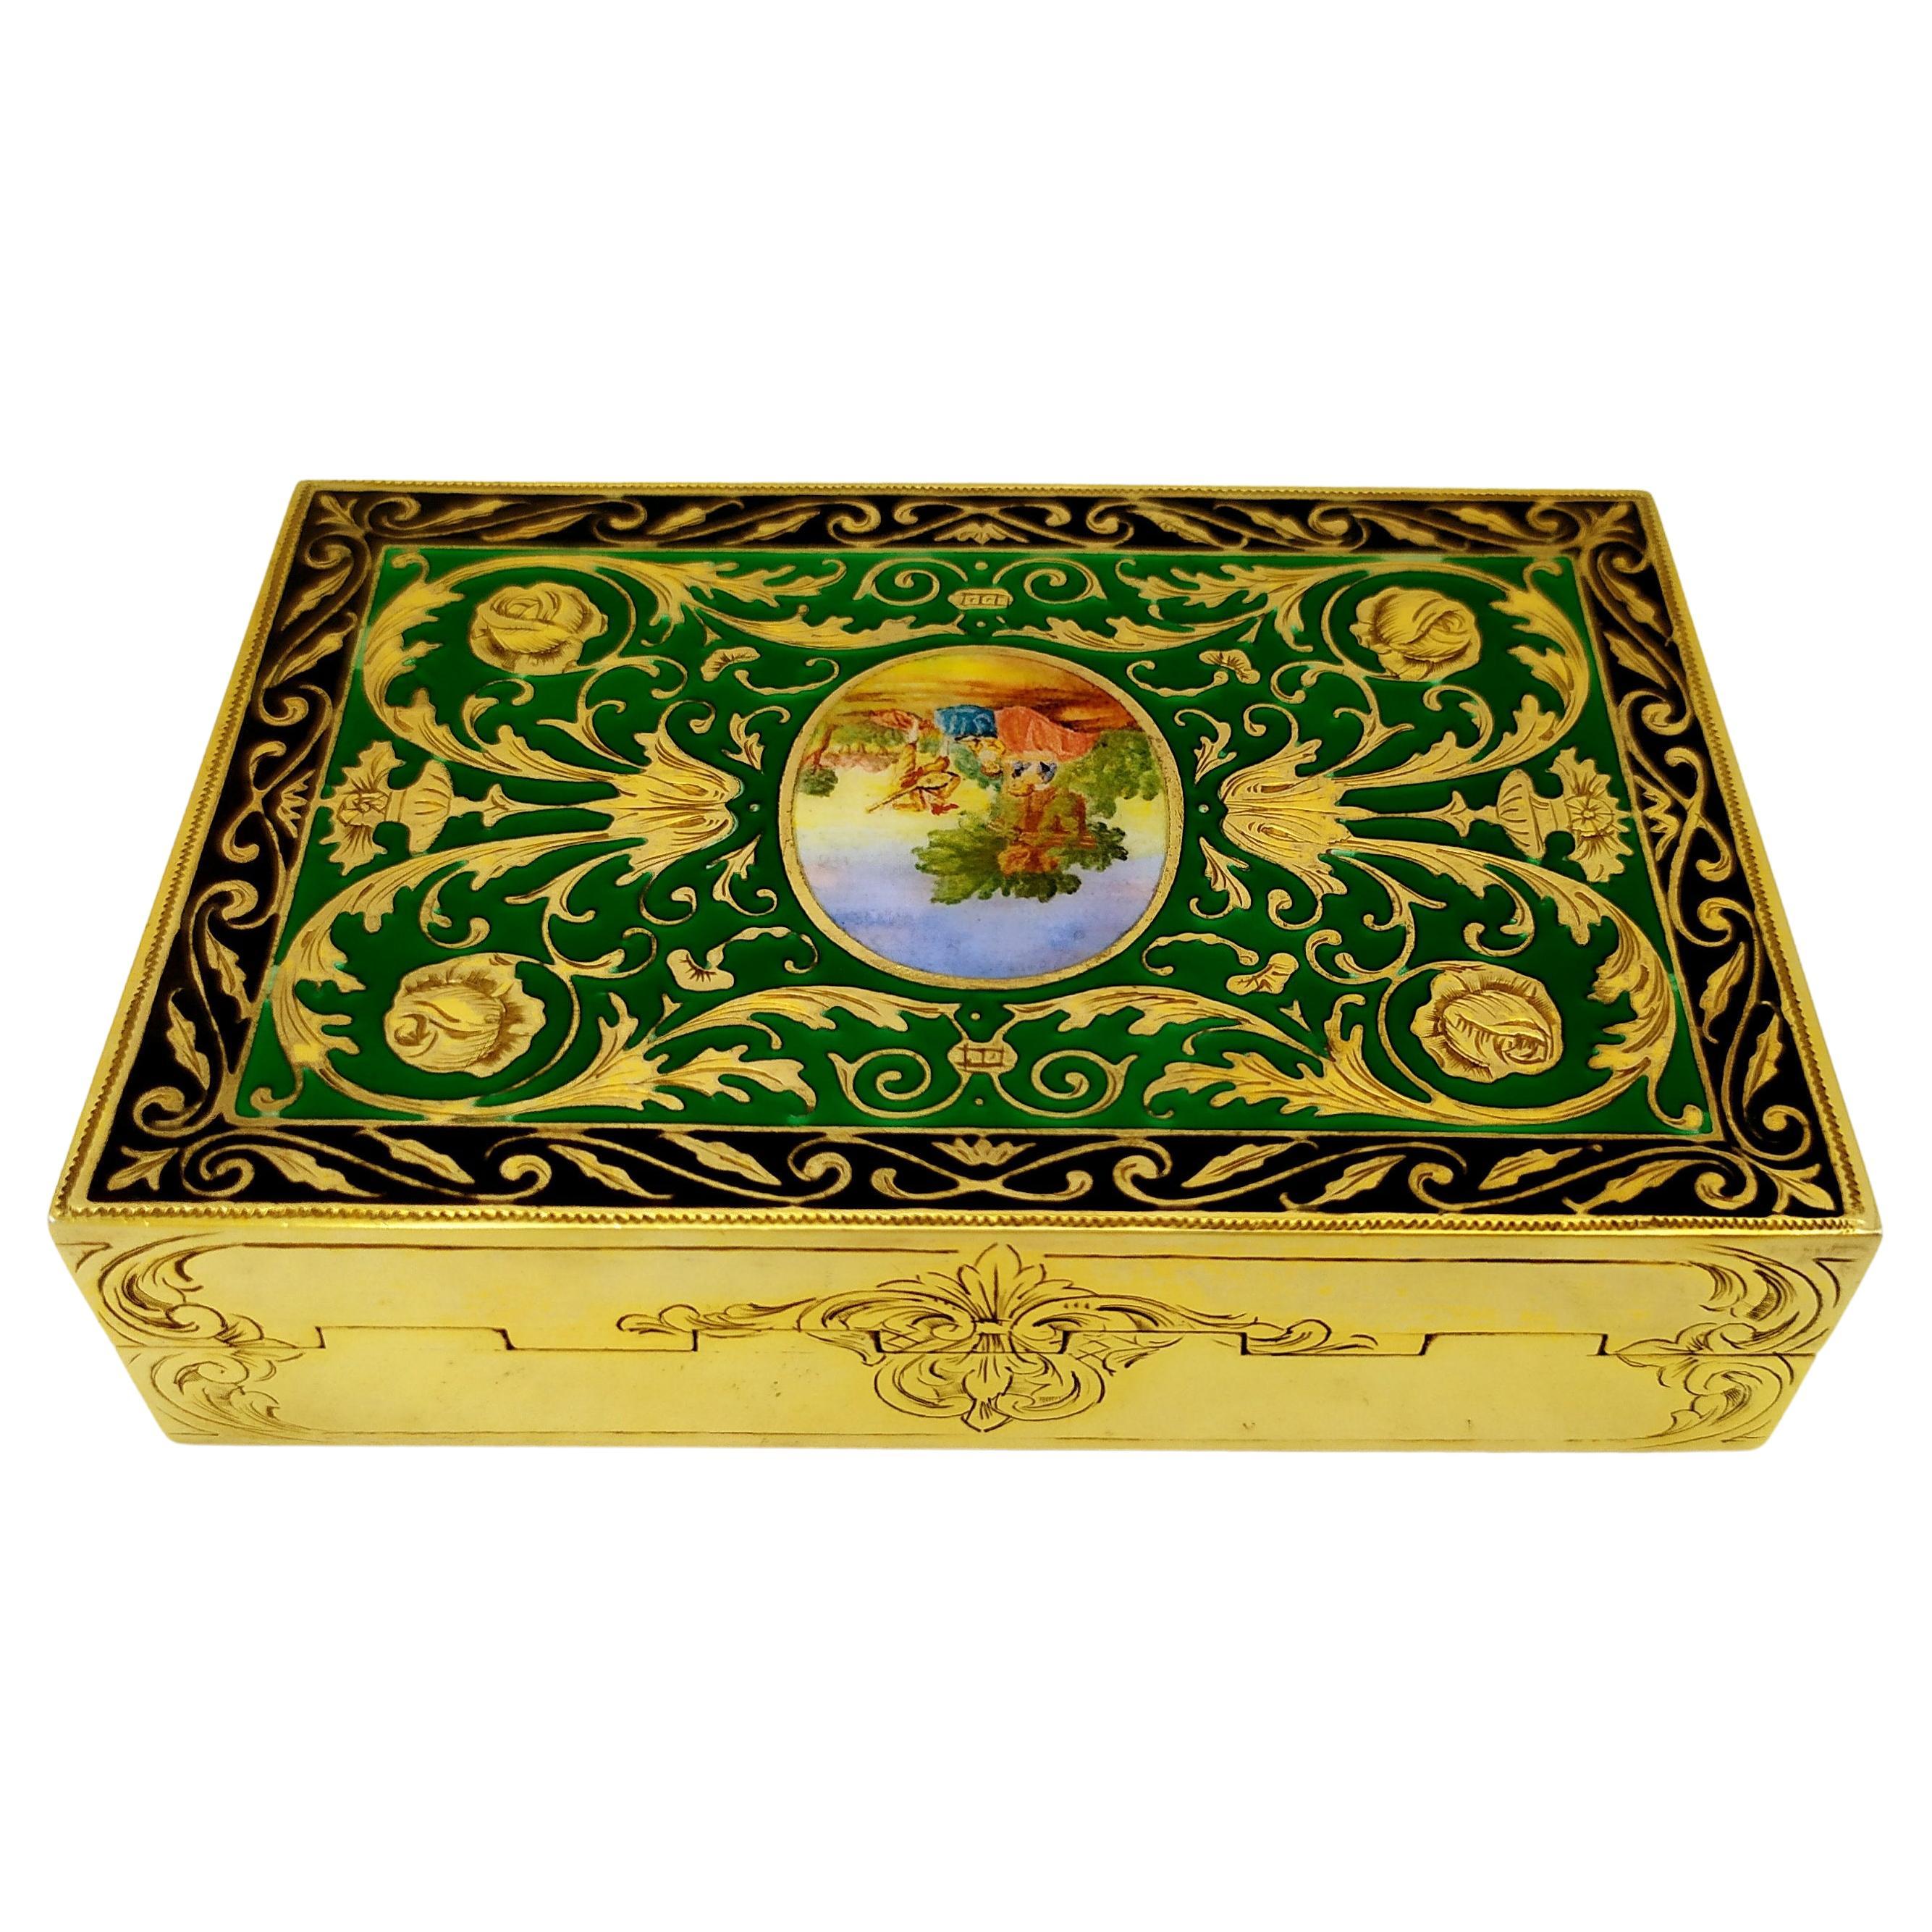 Table Box Green in French Empire Louis XVI style Sterling Silver Salimbeni.
Table box in 925/1000 sterling silver gold plated with translucent fired enamel inserted in a very fine hand-engraving of ornaments in the French Empire Louis XVI style and